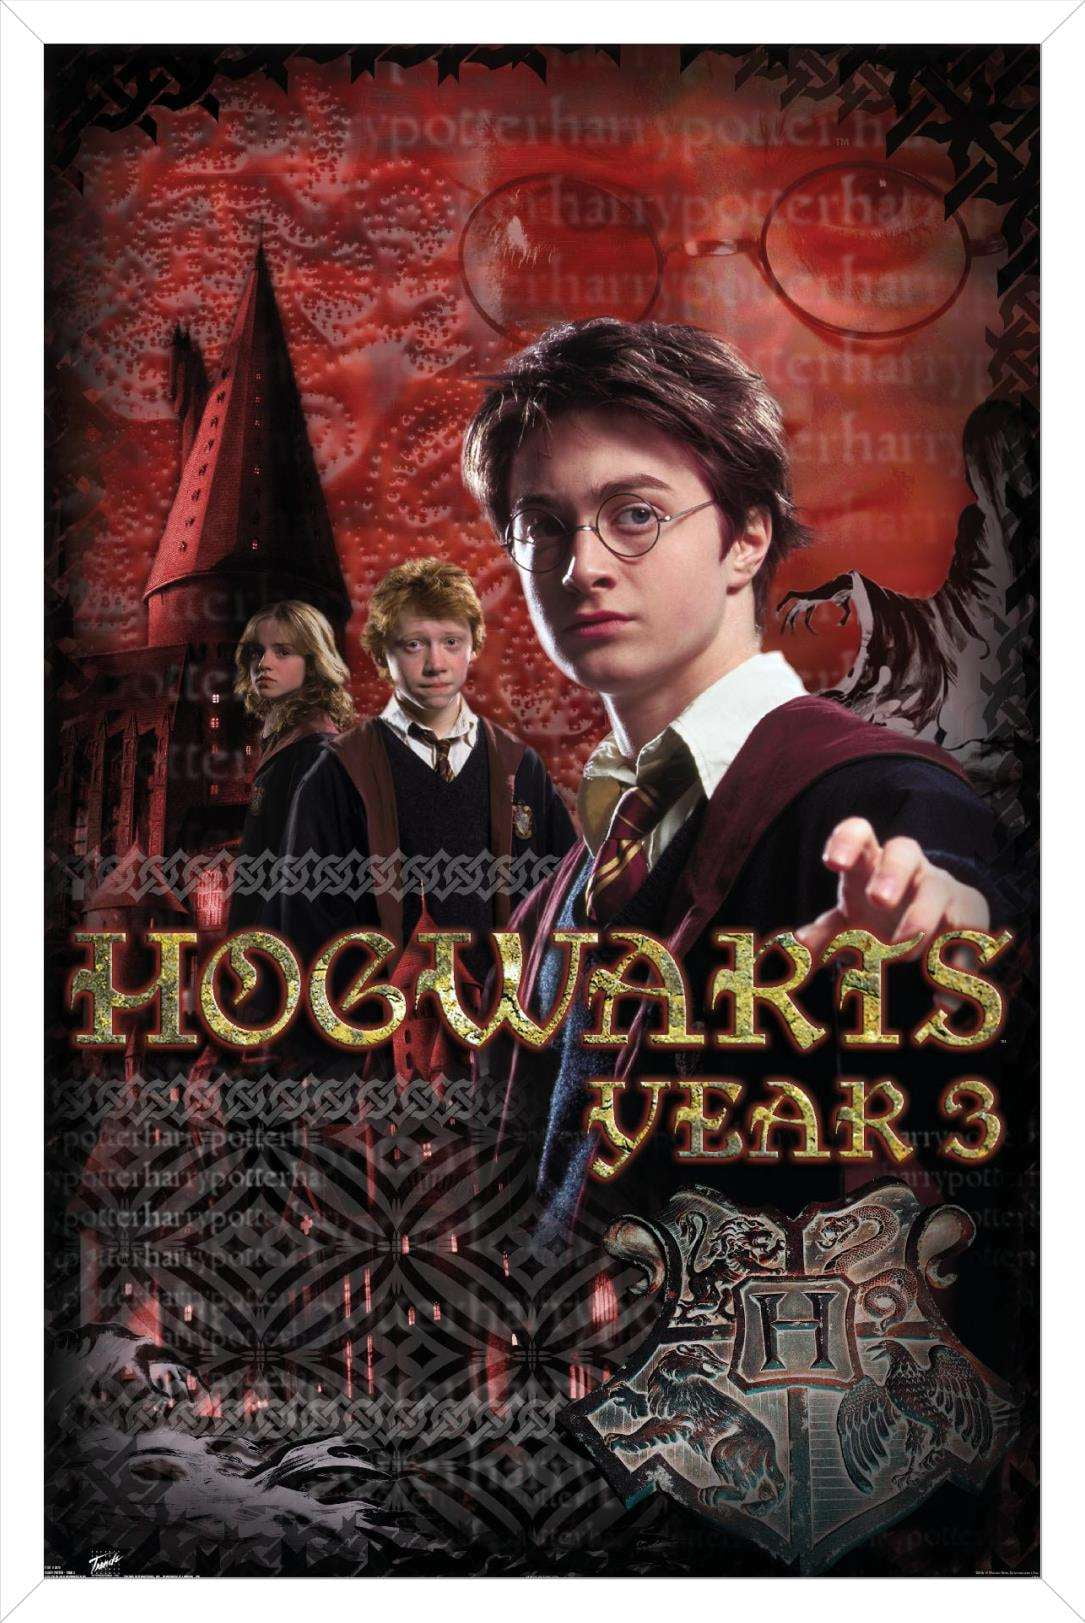 Harry Potter Poster Book: Hogwart's Through The Years